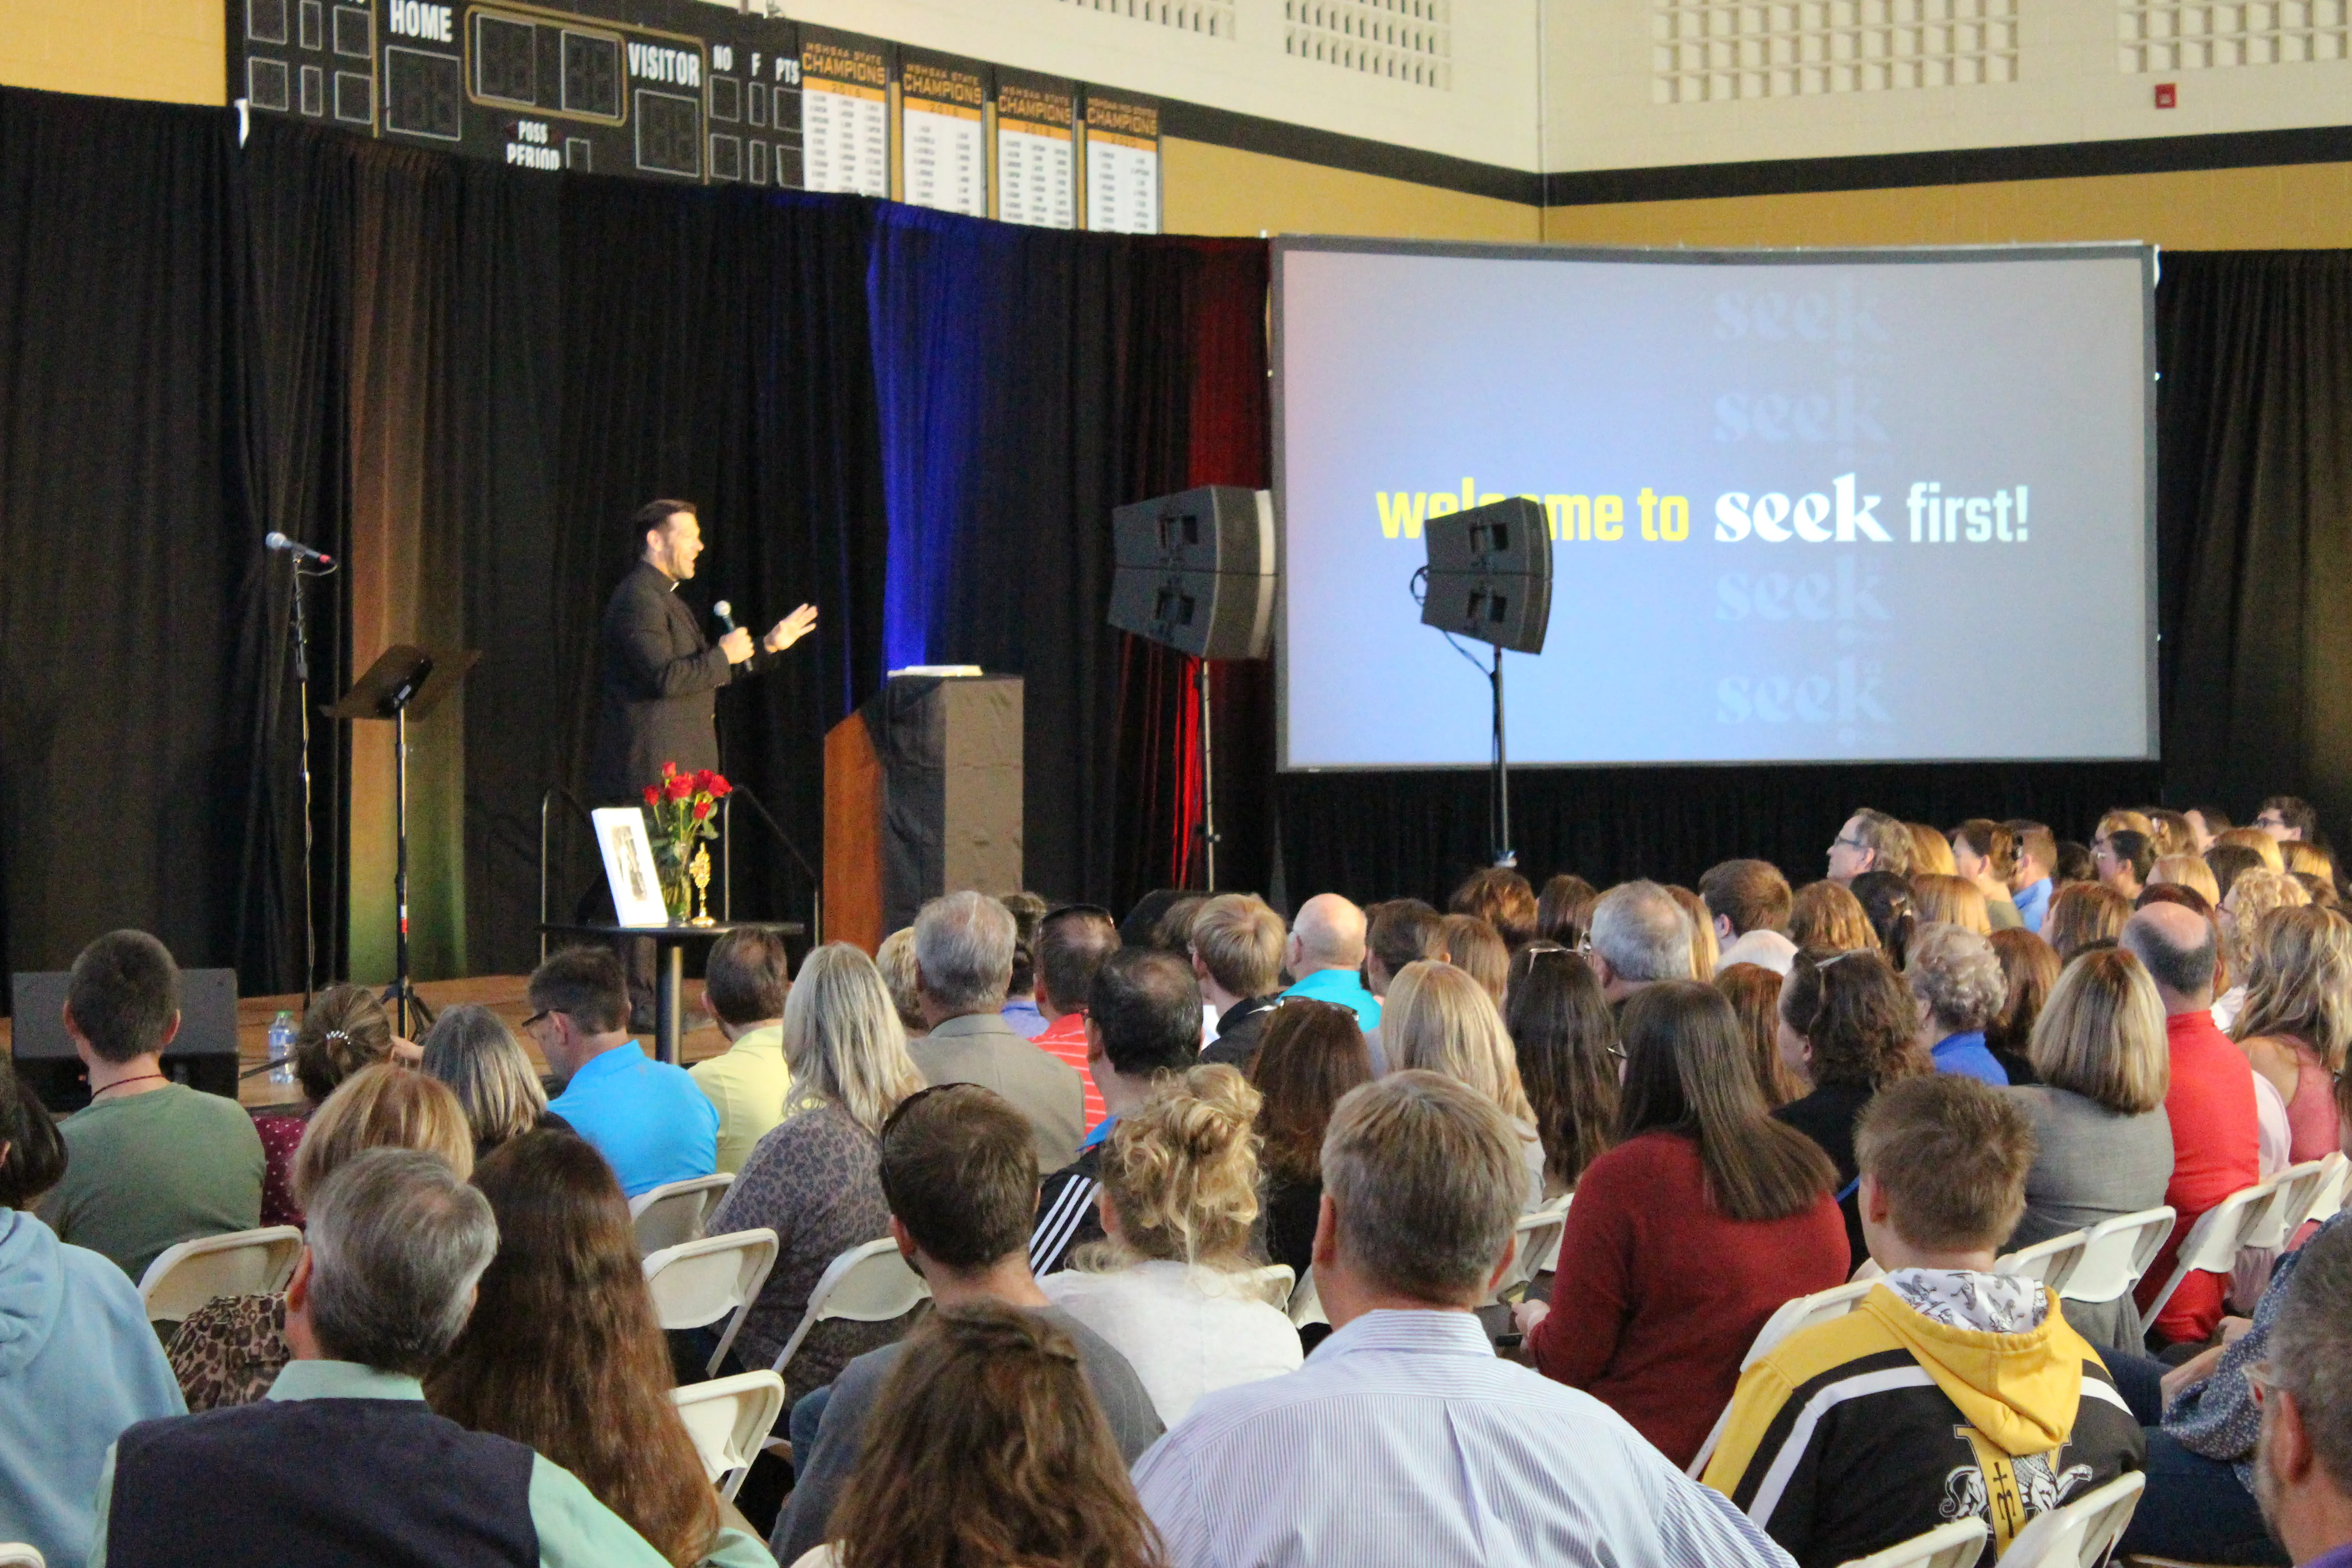 Father Mike Schmitz addresses the crowd at "SEEK First," a preview event put on by the Fellowship of Catholic University Students in St. Louis on Oct. 1, 2022.?w=200&h=150